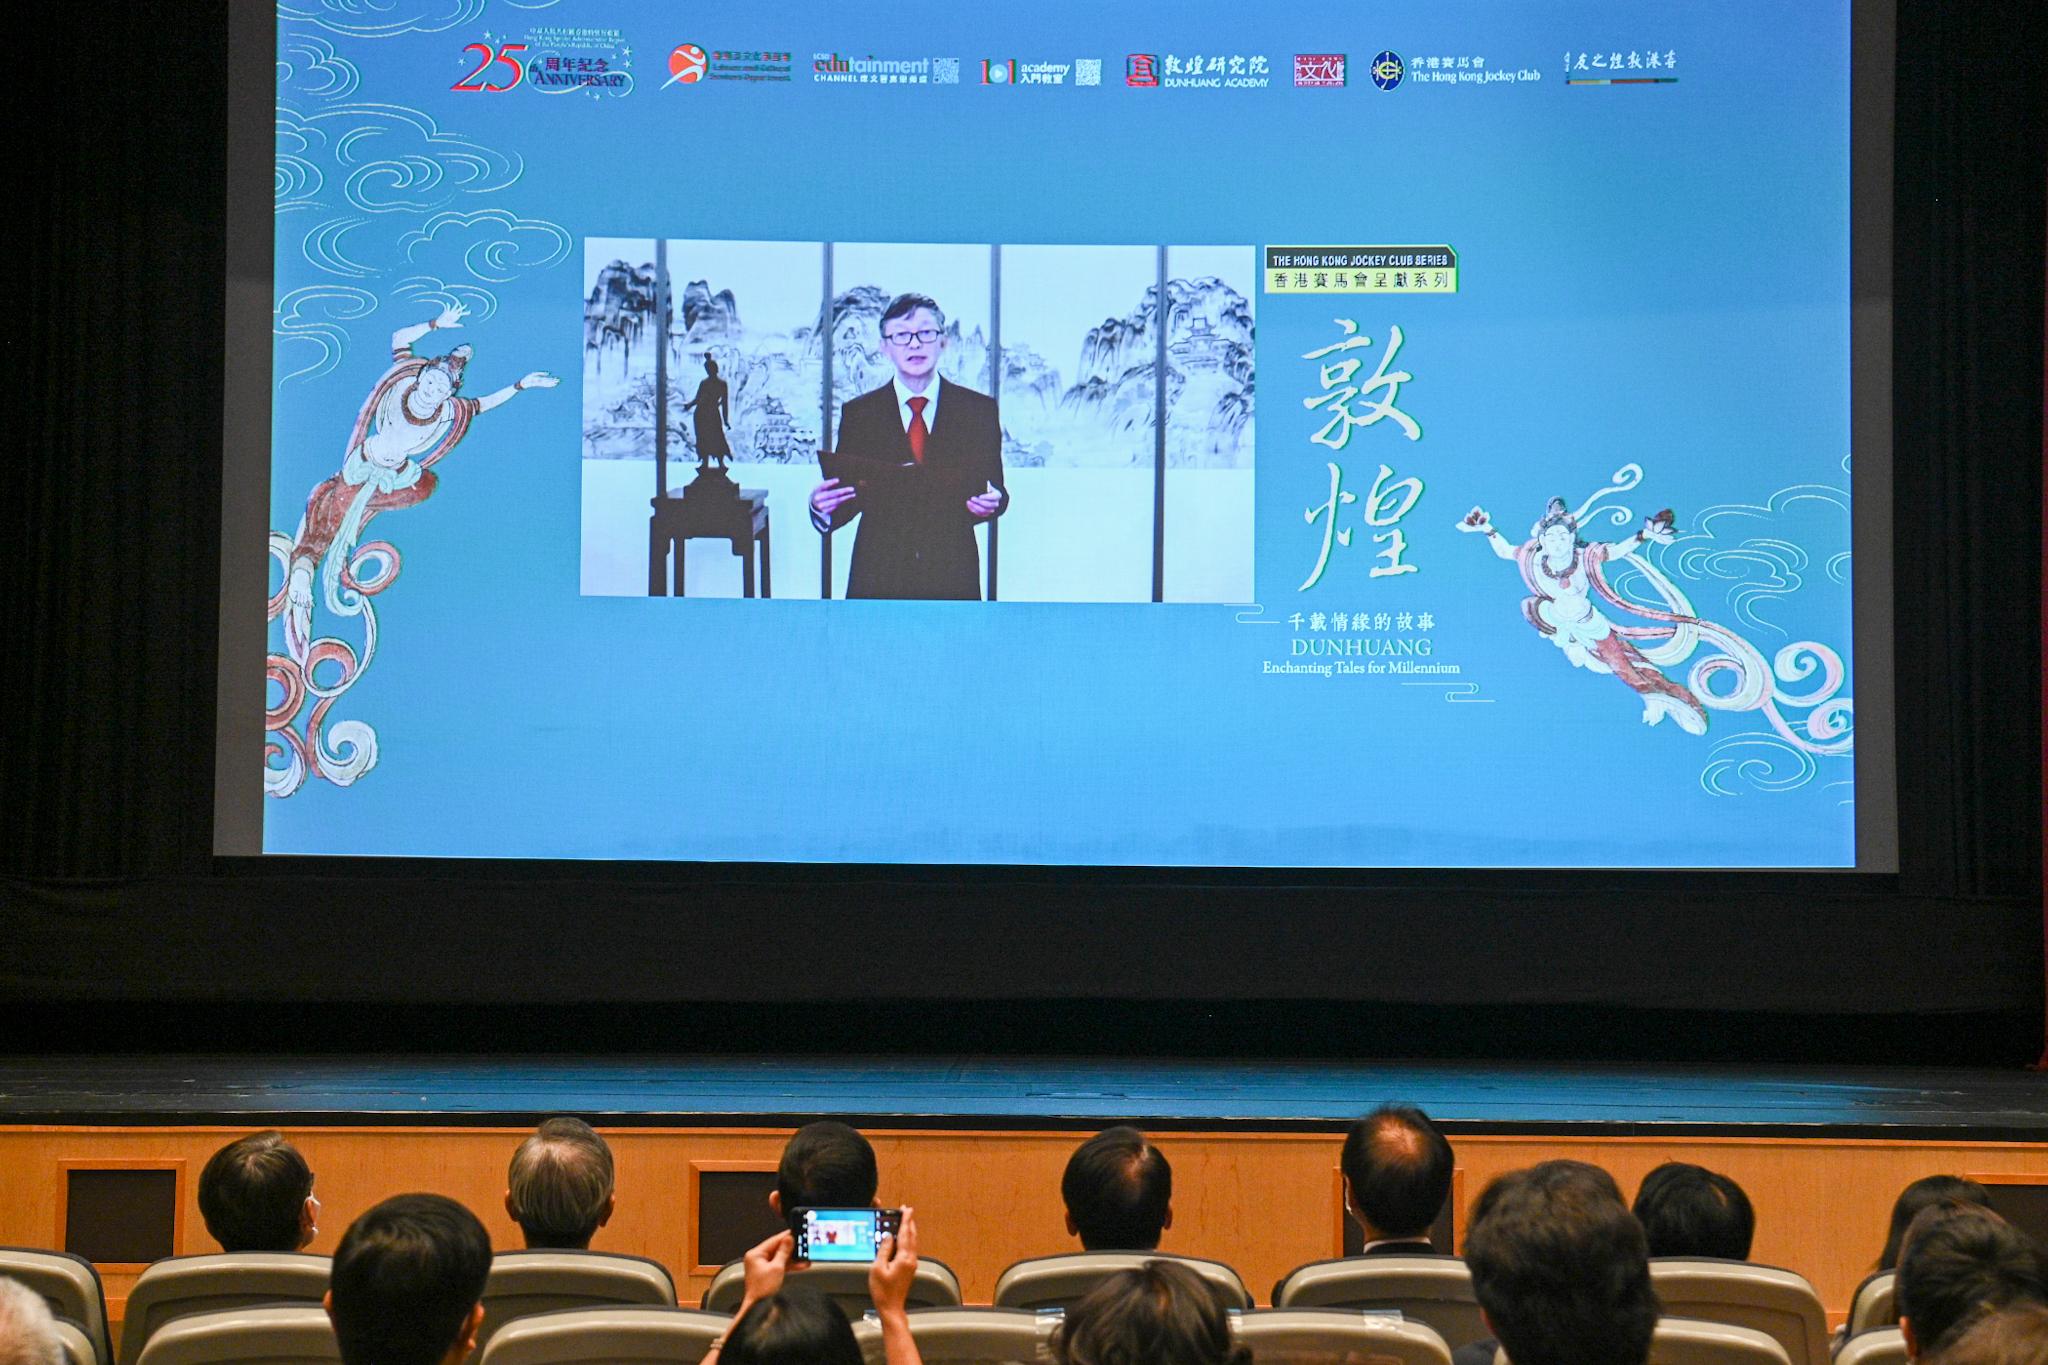 The opening ceremony for the exhibition "The Hong Kong Jockey Club Series: Dunhuang: Enchanting Tales for Millennium" was held today (August 23) at the Hong Kong Heritage Museum. Photo shows the Director of the Dunhuang Academy, Dr Su Bomin, joining the ceremony online.